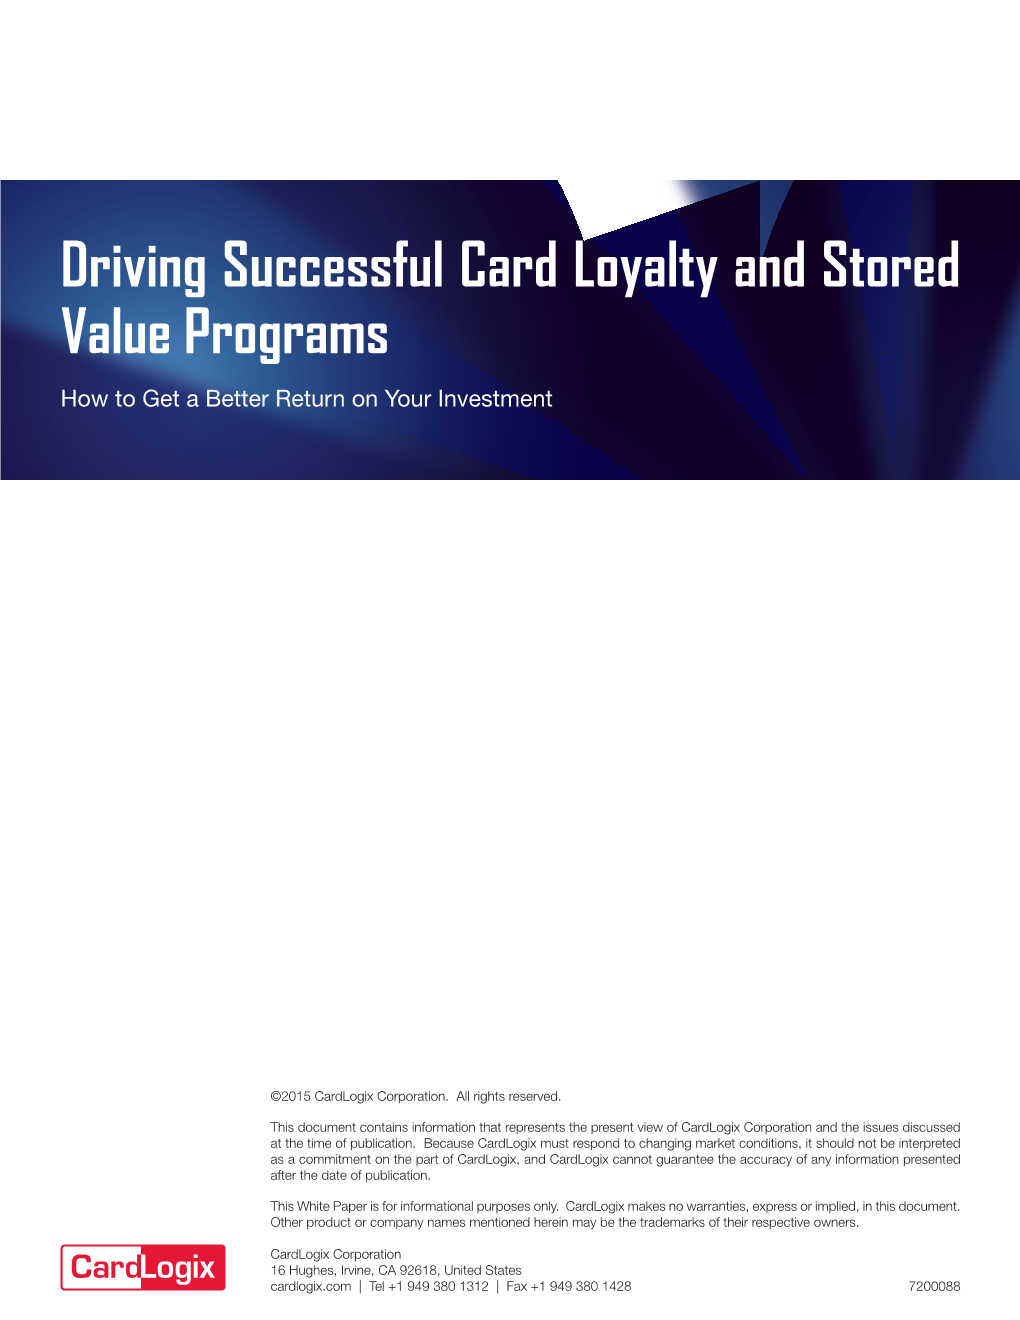 Driving Successful Card Loyalty and Stored Value Programs How to Get a Better Return on Your Investment